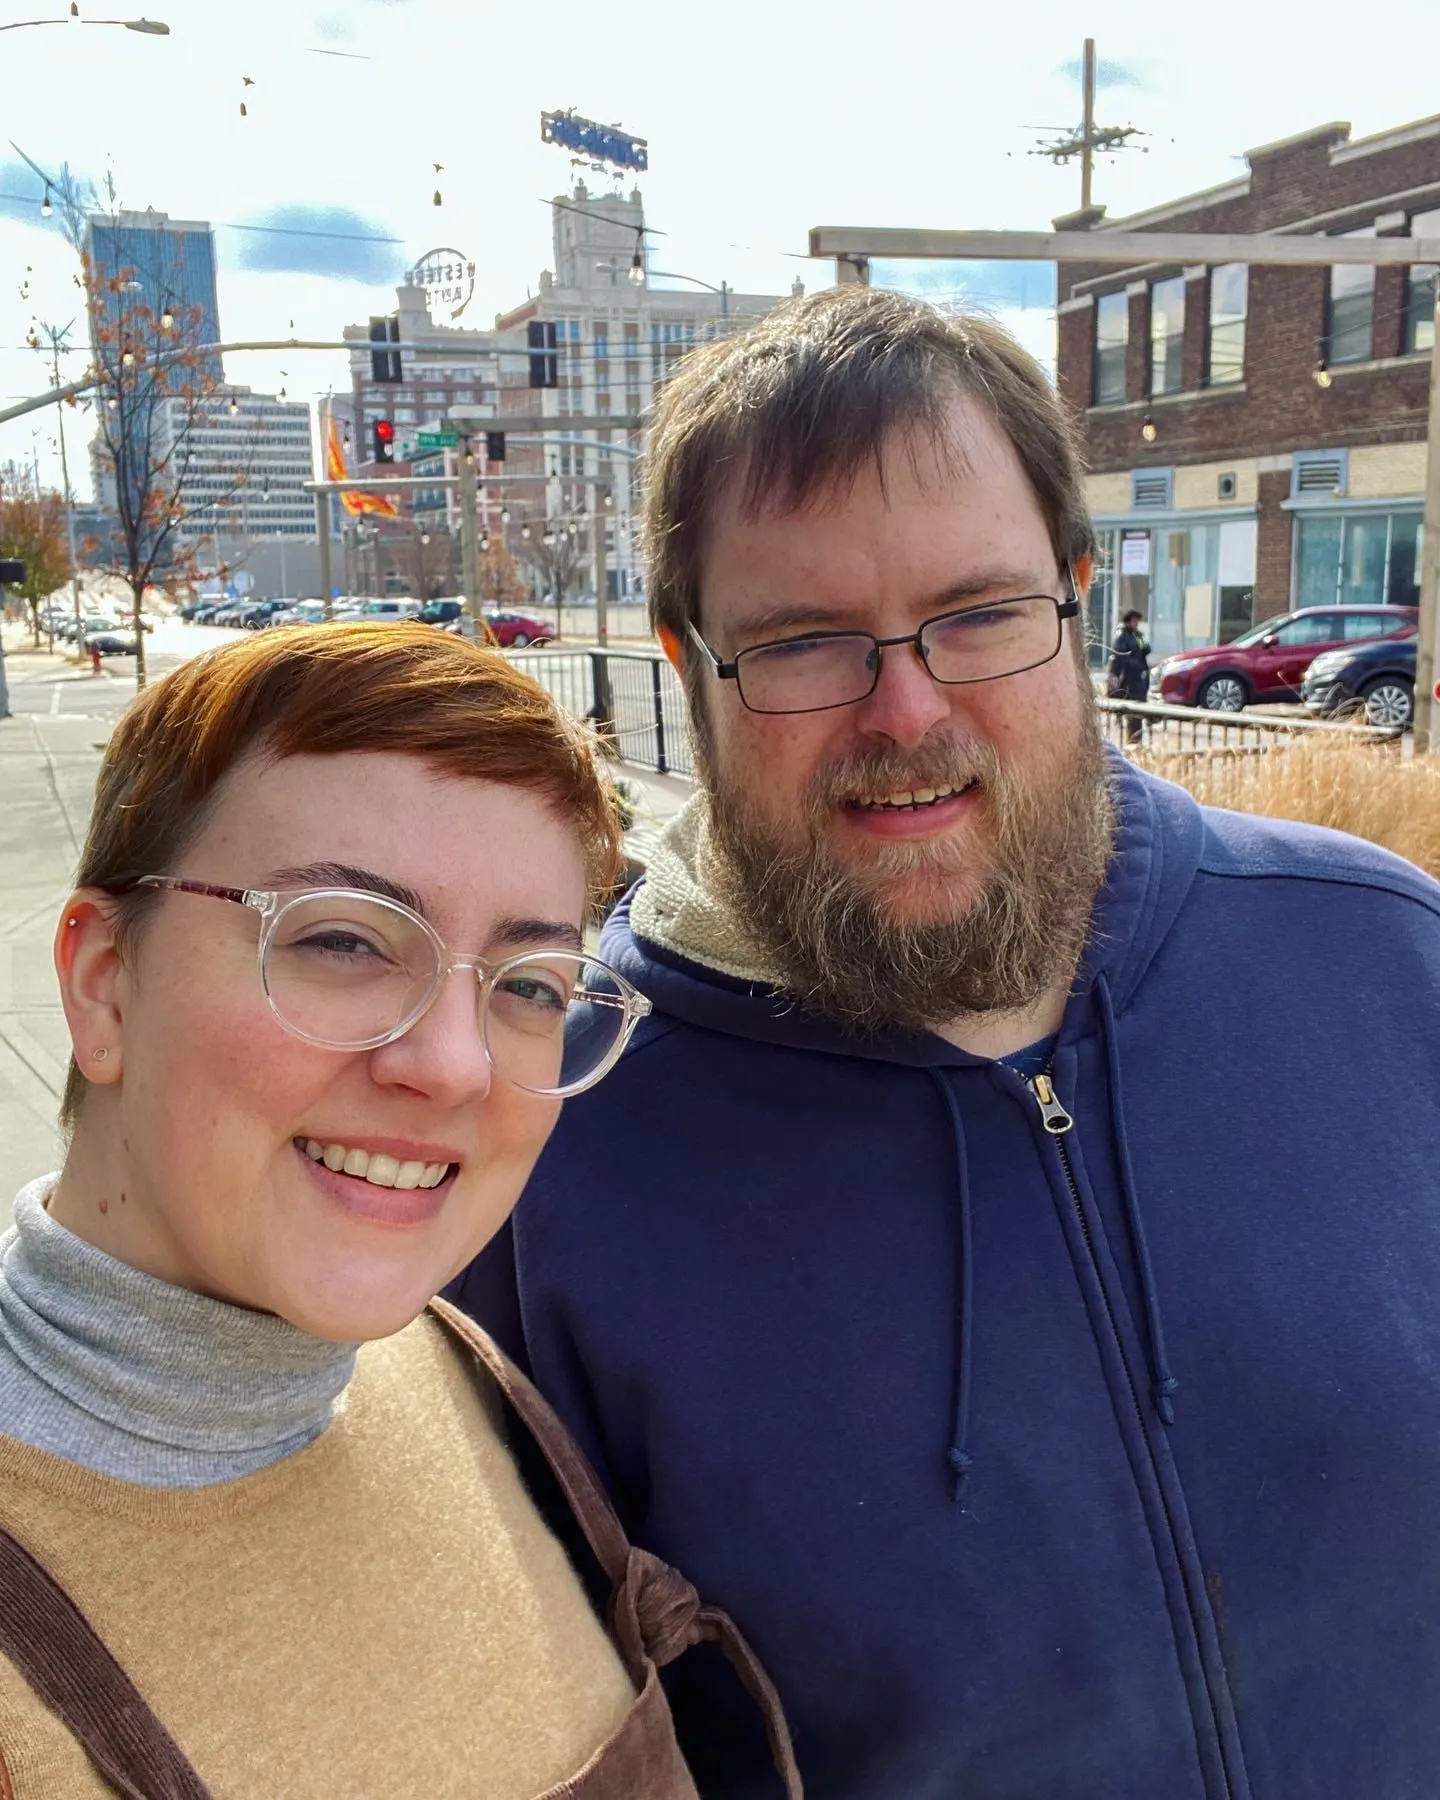 Leah and Daniel stand on street for selfie - 2023 word joy reflection